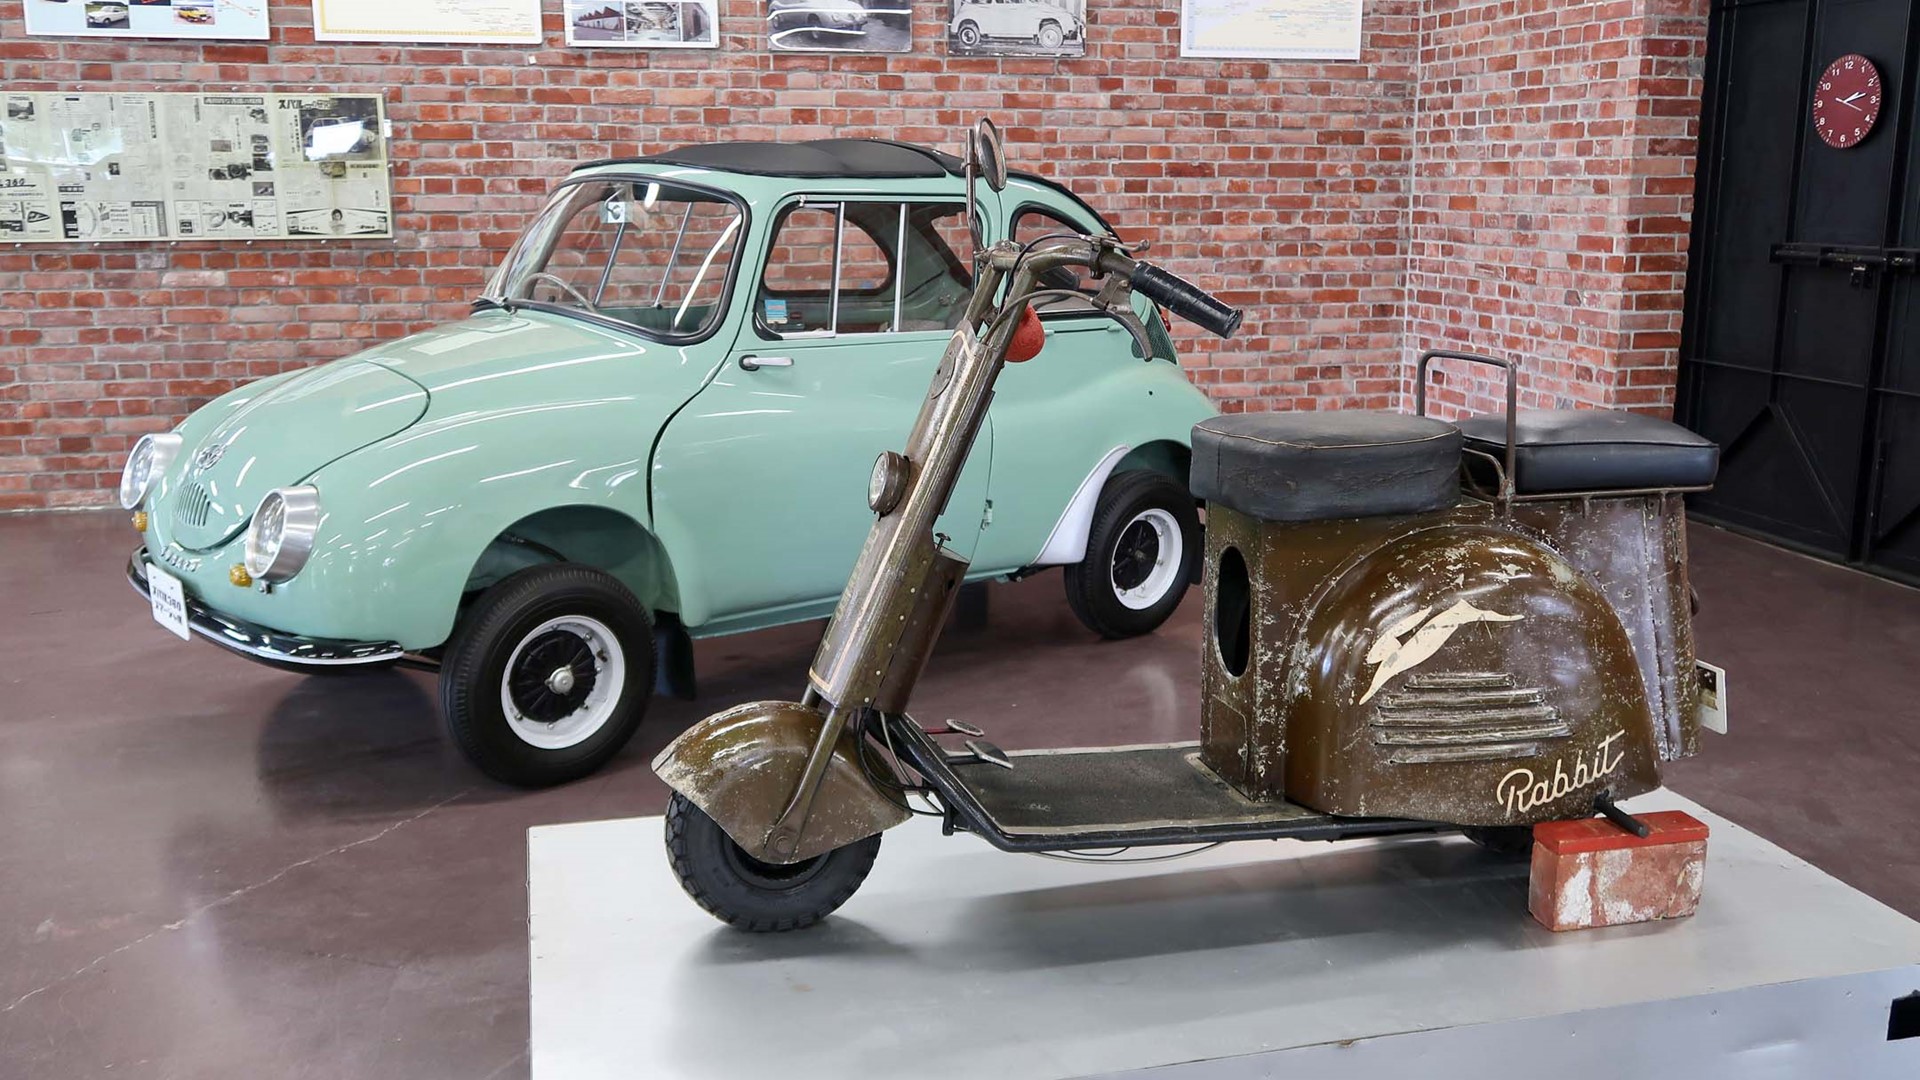 Subaru 360 and Scooter